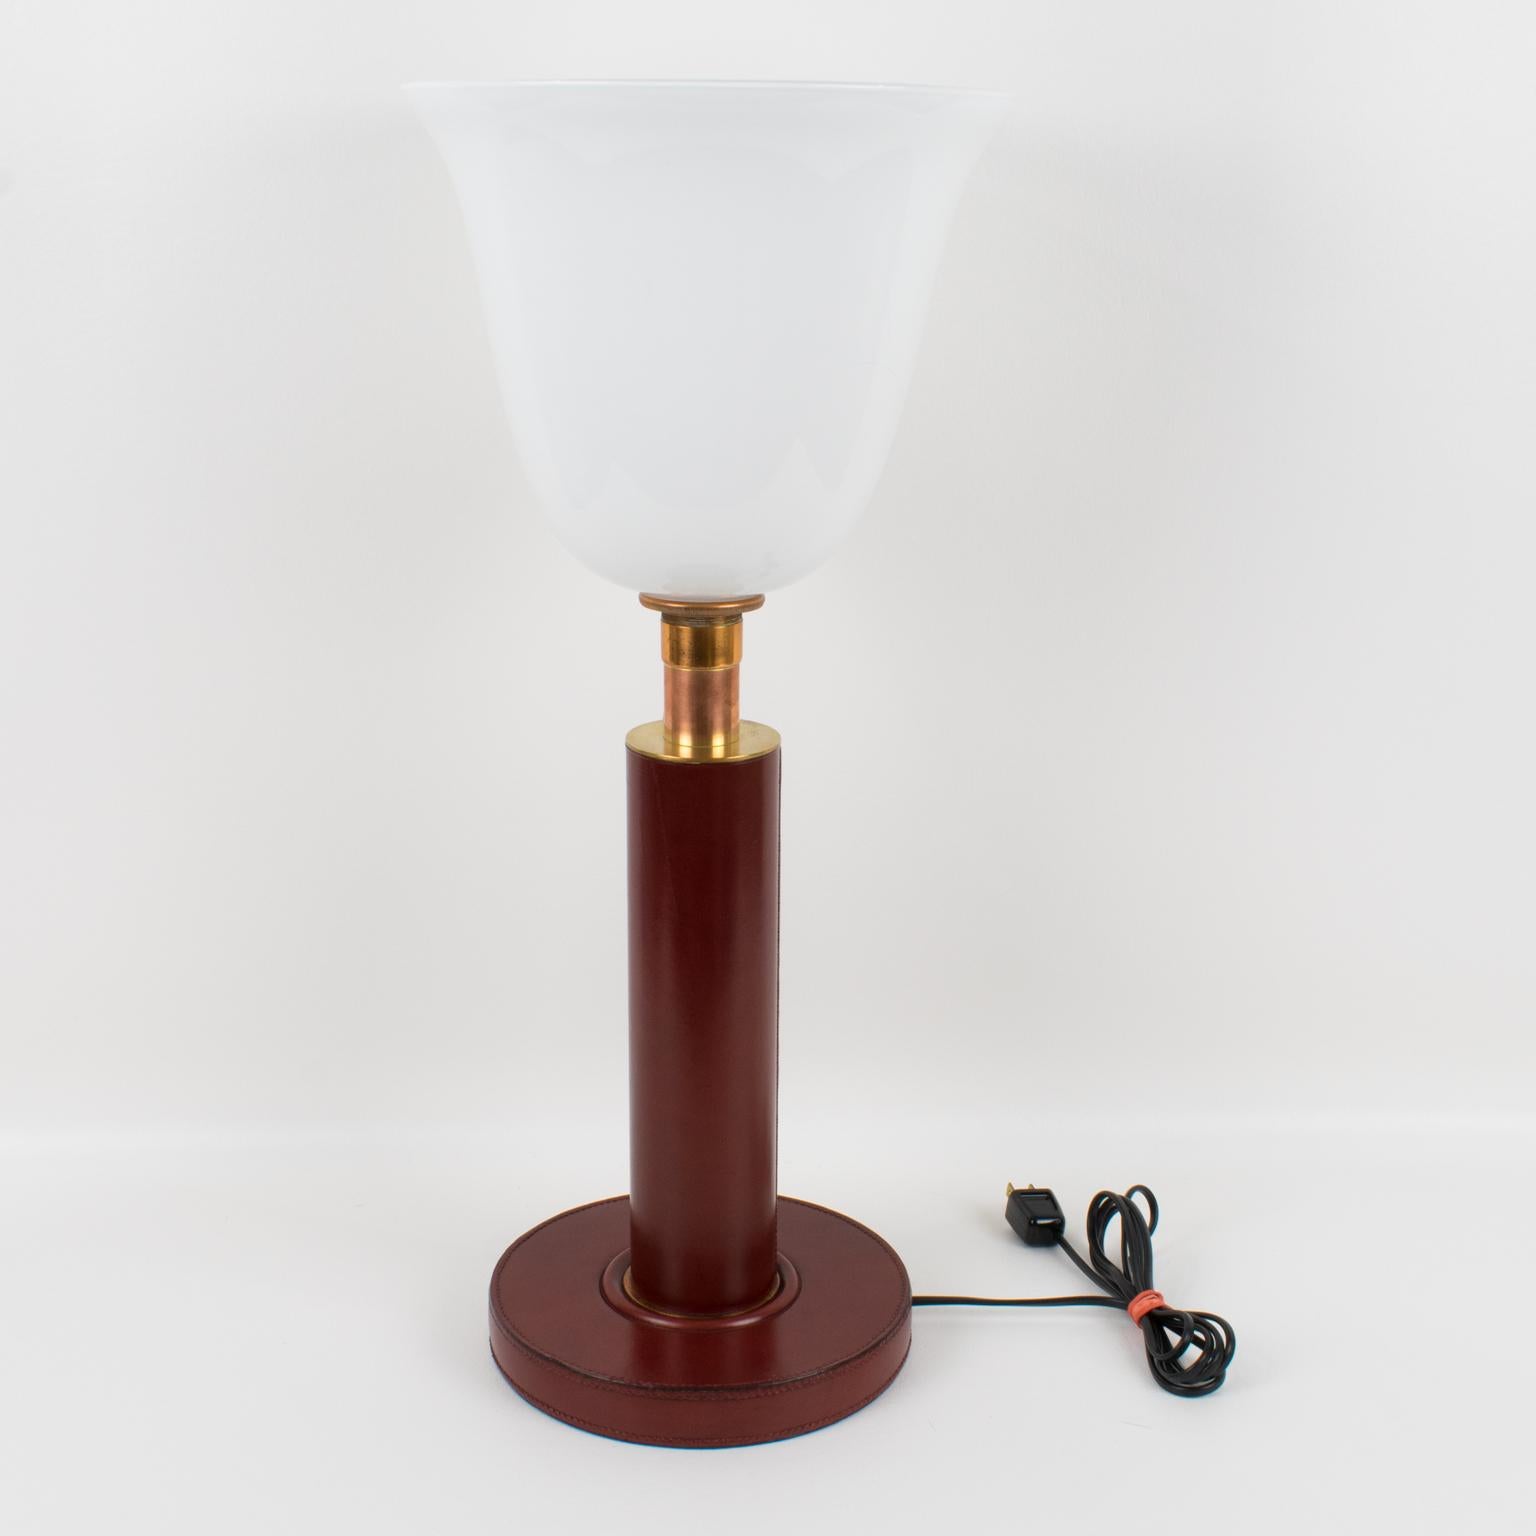 Stunning French Art Deco table lamp, by Paul Dupre Lafon, circa 1950. This elegant desk or table lamp features a hand-stitched oxblood red leather base and body with brass and copper accents. Upright lamp with white opaline glass tulip shade.